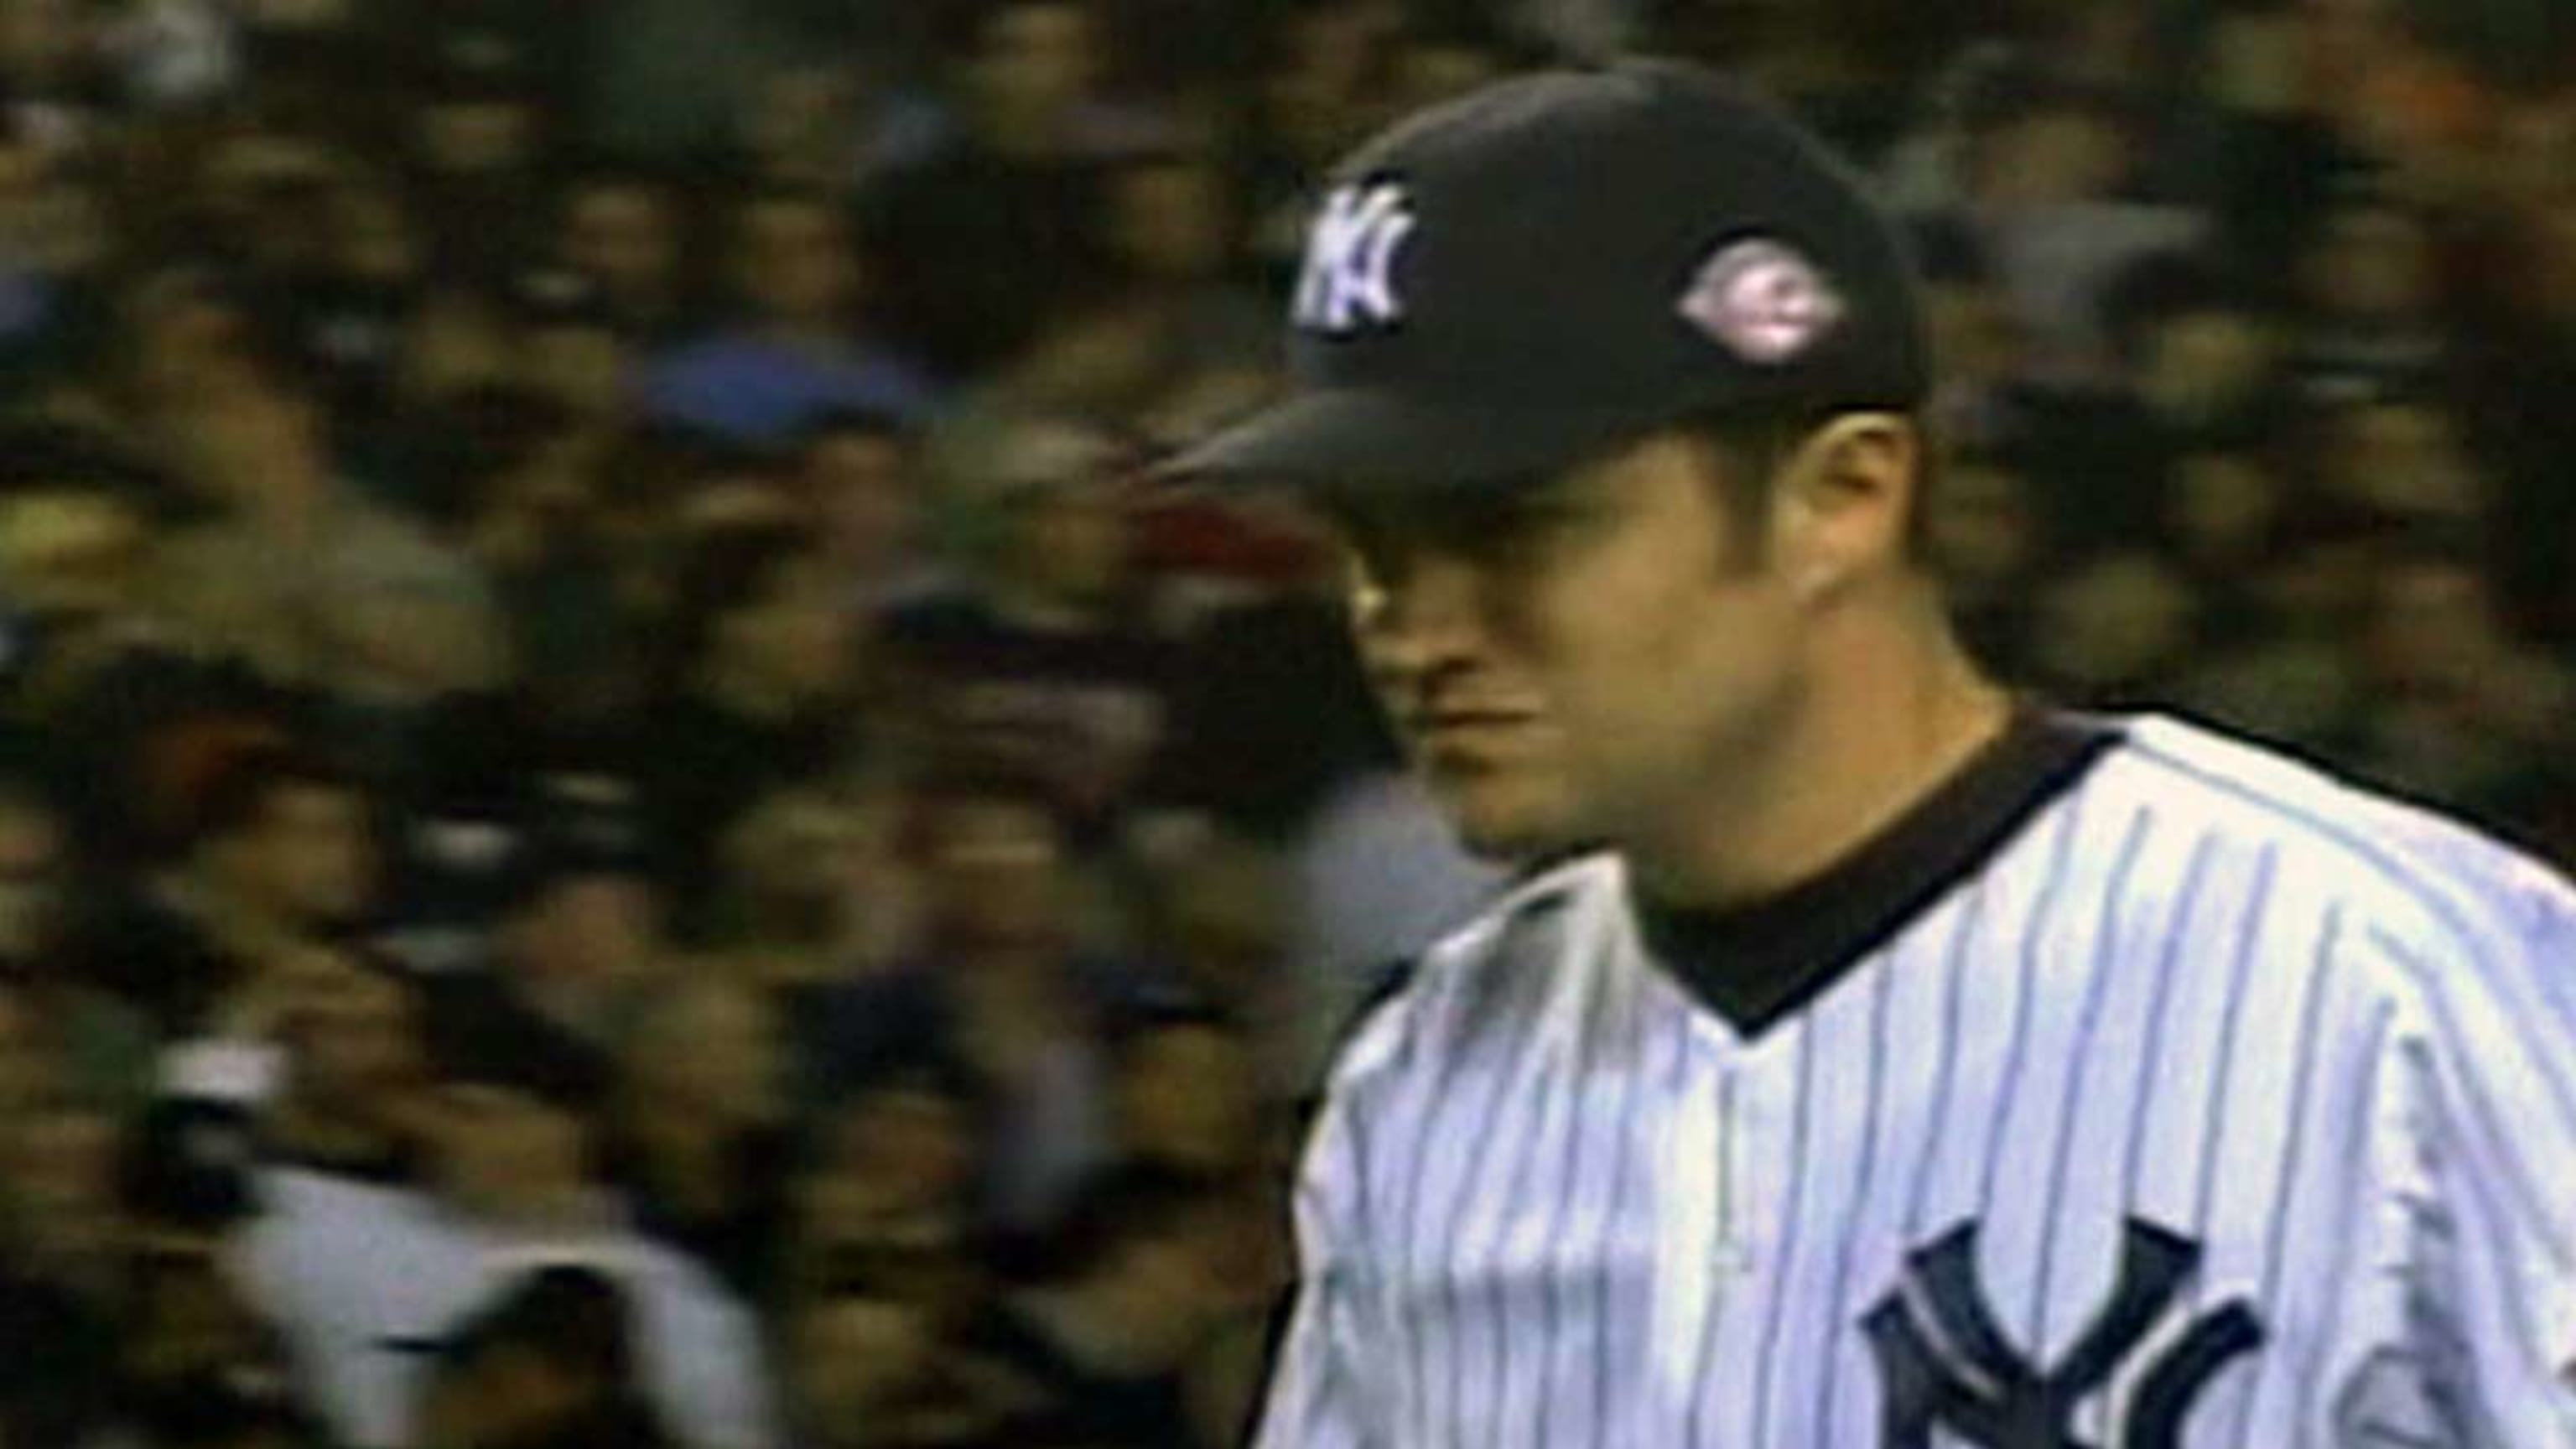 May 14, 1998: Mike Mussina takes a line drive to the face as Cleveland nips  Baltimore, 5-4 – Society for American Baseball Research